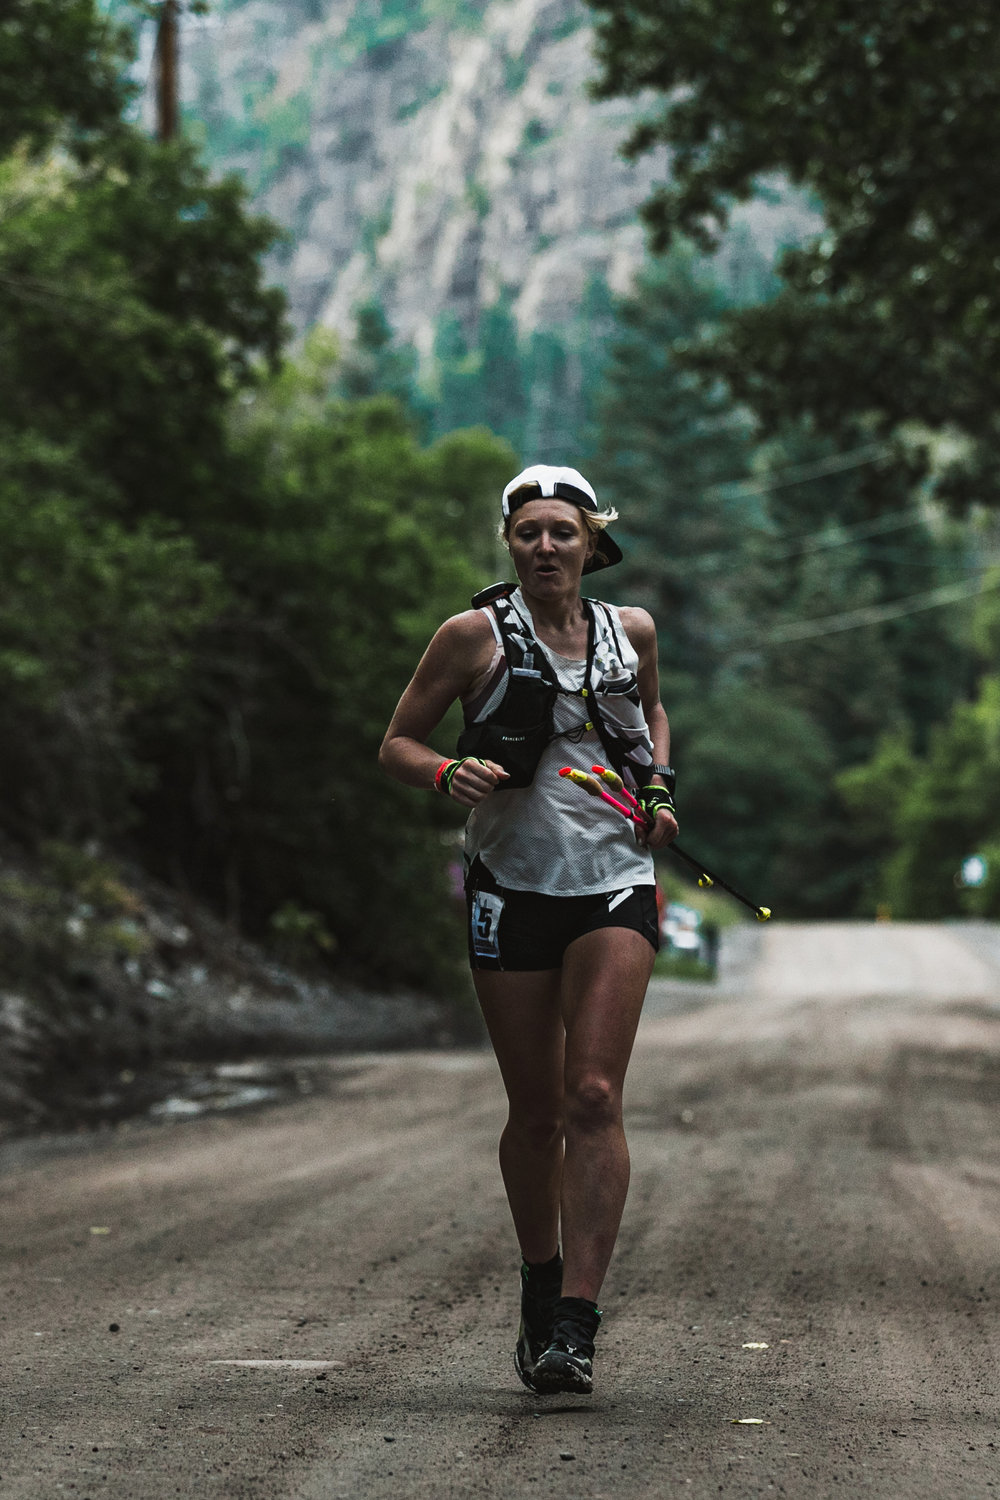 Sabrina Stanley won her 13th-consecutive ultramarathon after taking first in the Hardrock 100 in Silverton, Colorado, on July 17.